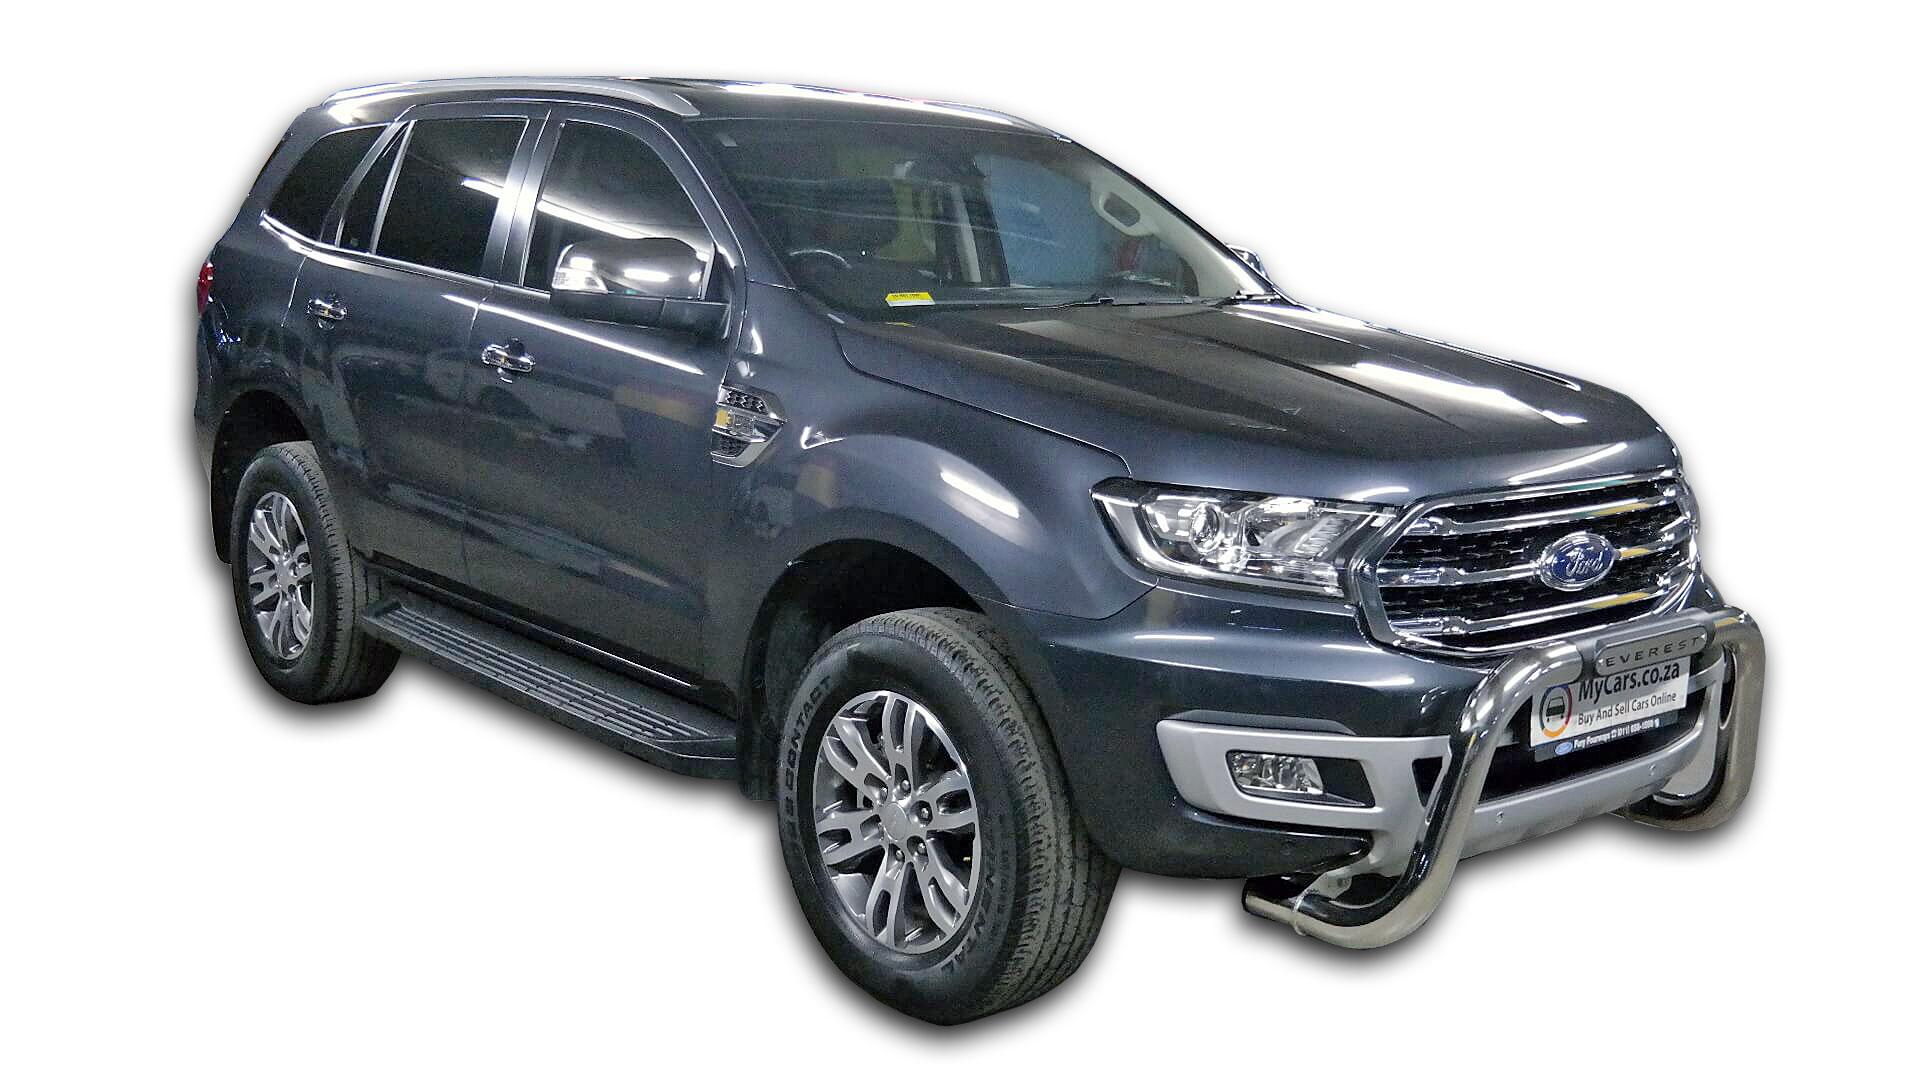 Ford Everest 3.2 Tdci XLT 4X4 A/T